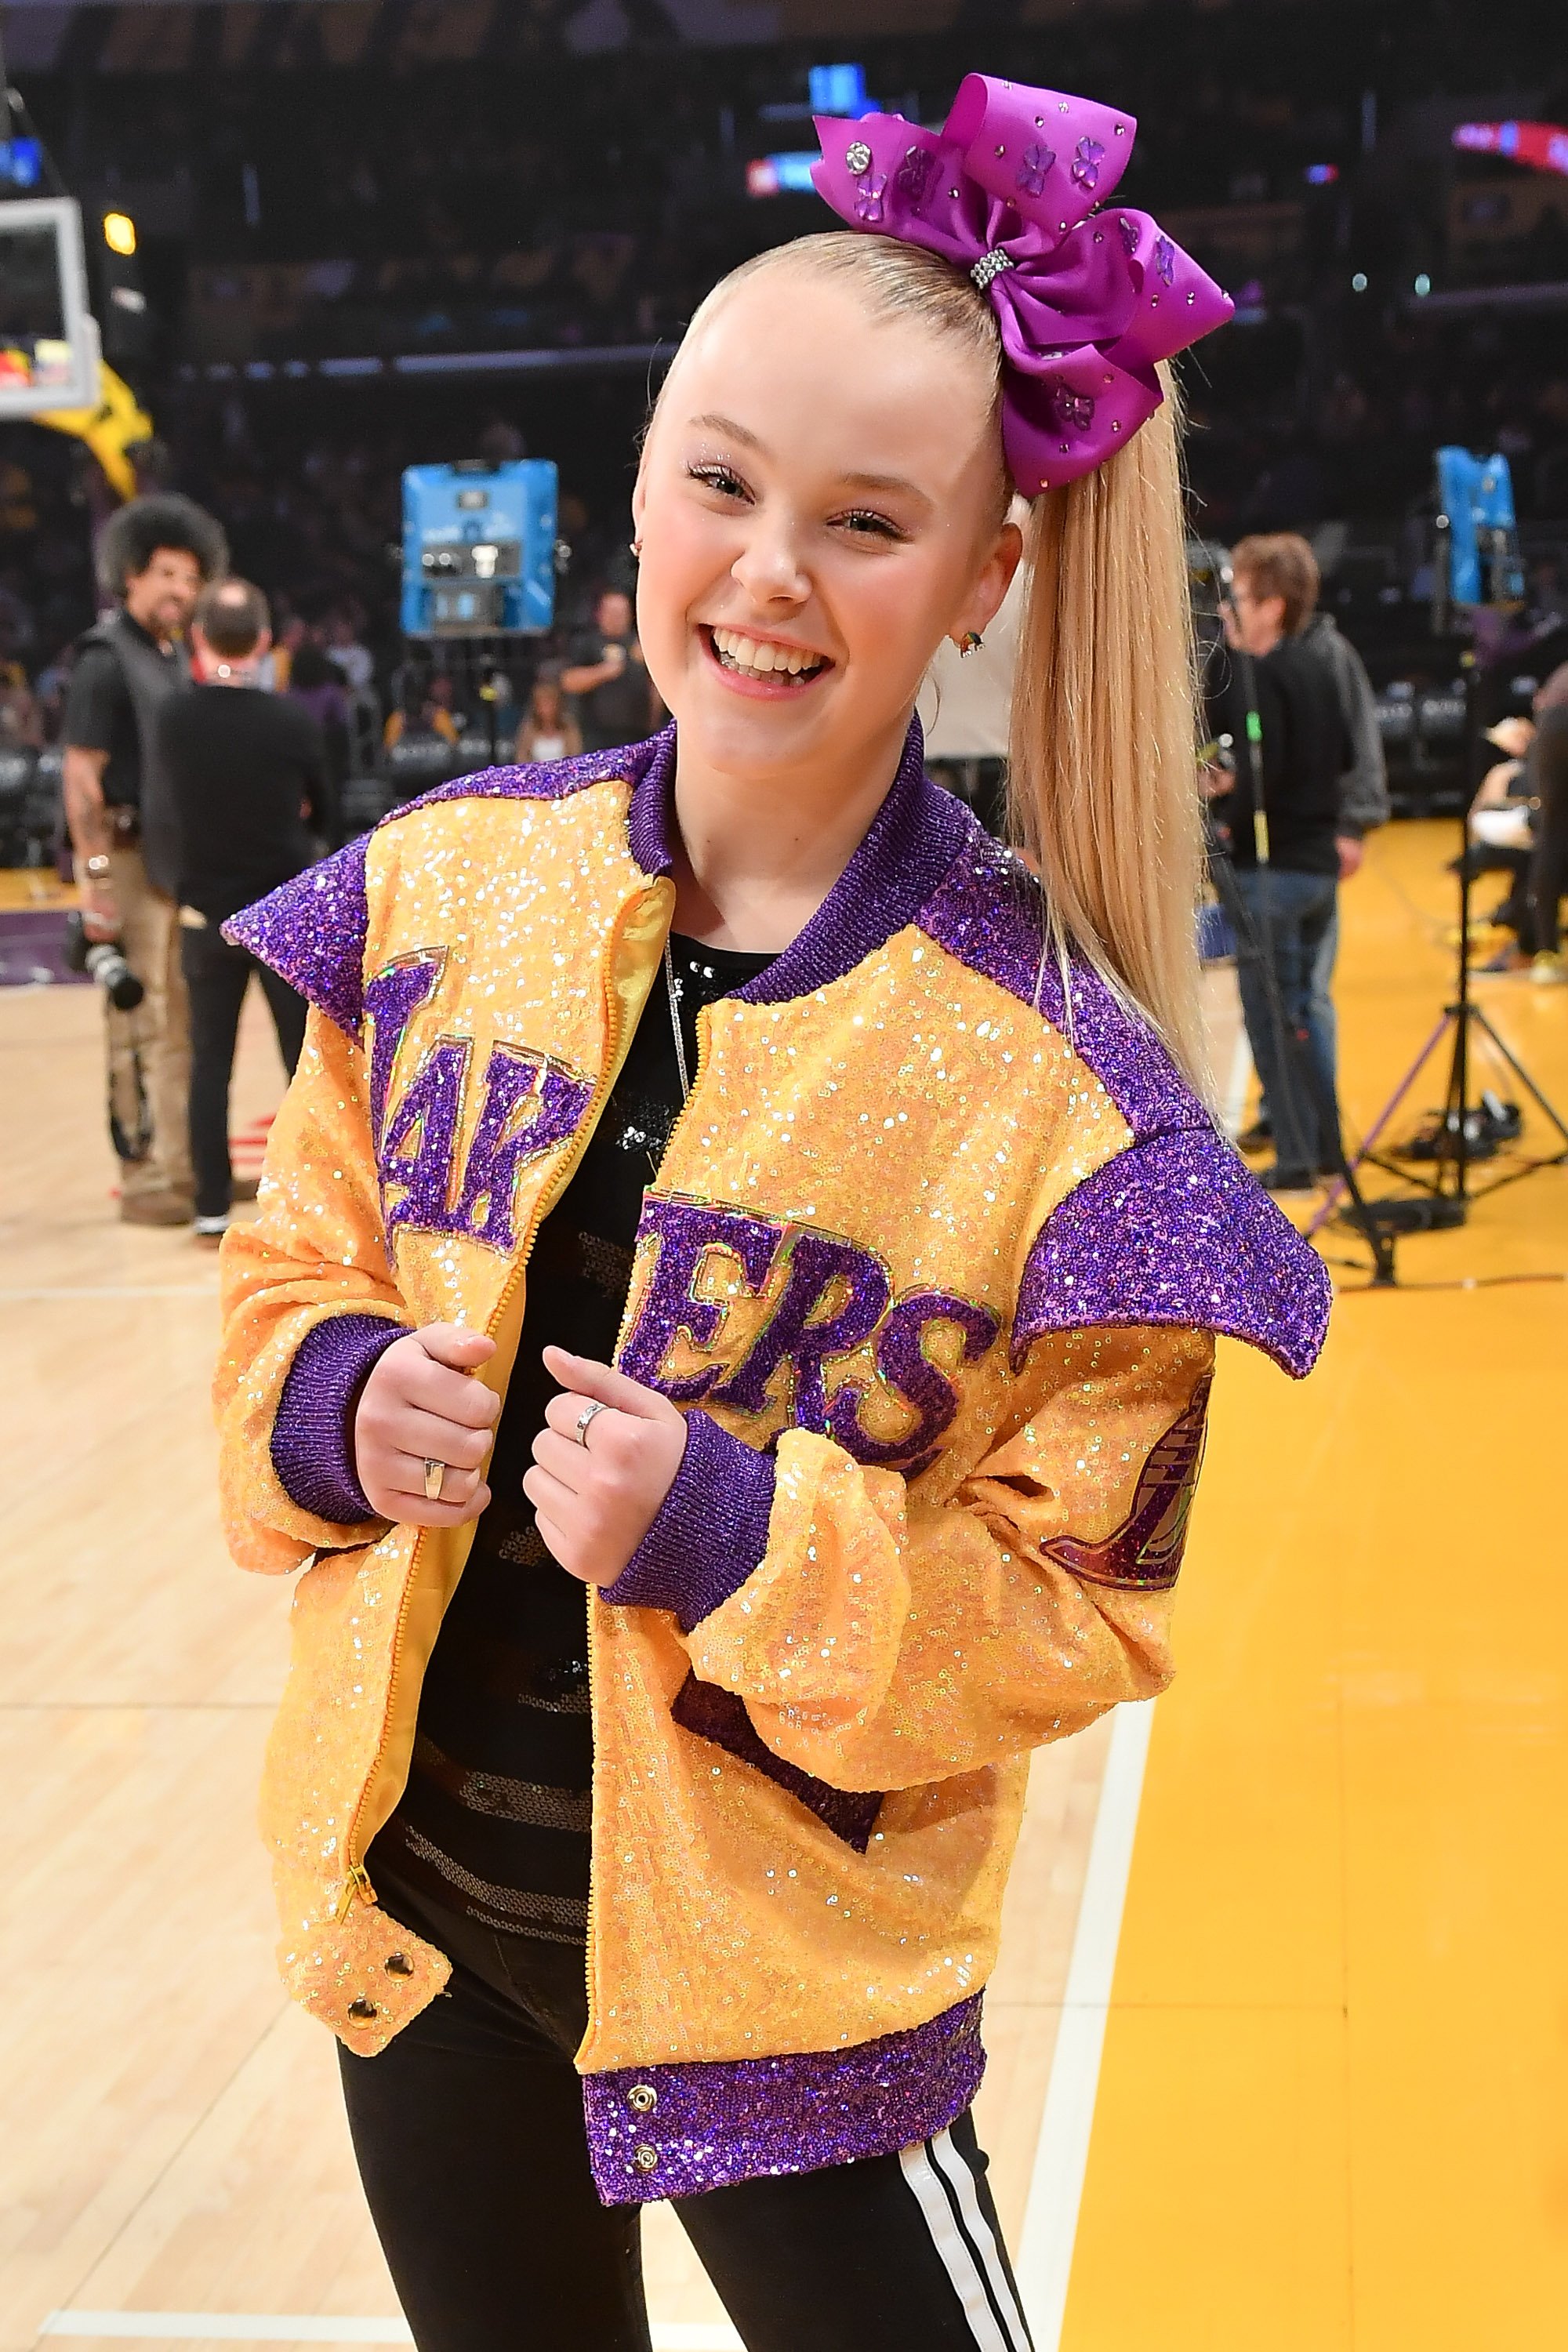 JoJo Siwa attends a basketball game between the Los Angeles Lakers and Phoenix Suns at Staples Center on February 10, 2020 in Los Angeles, California | Photo: Getty Images